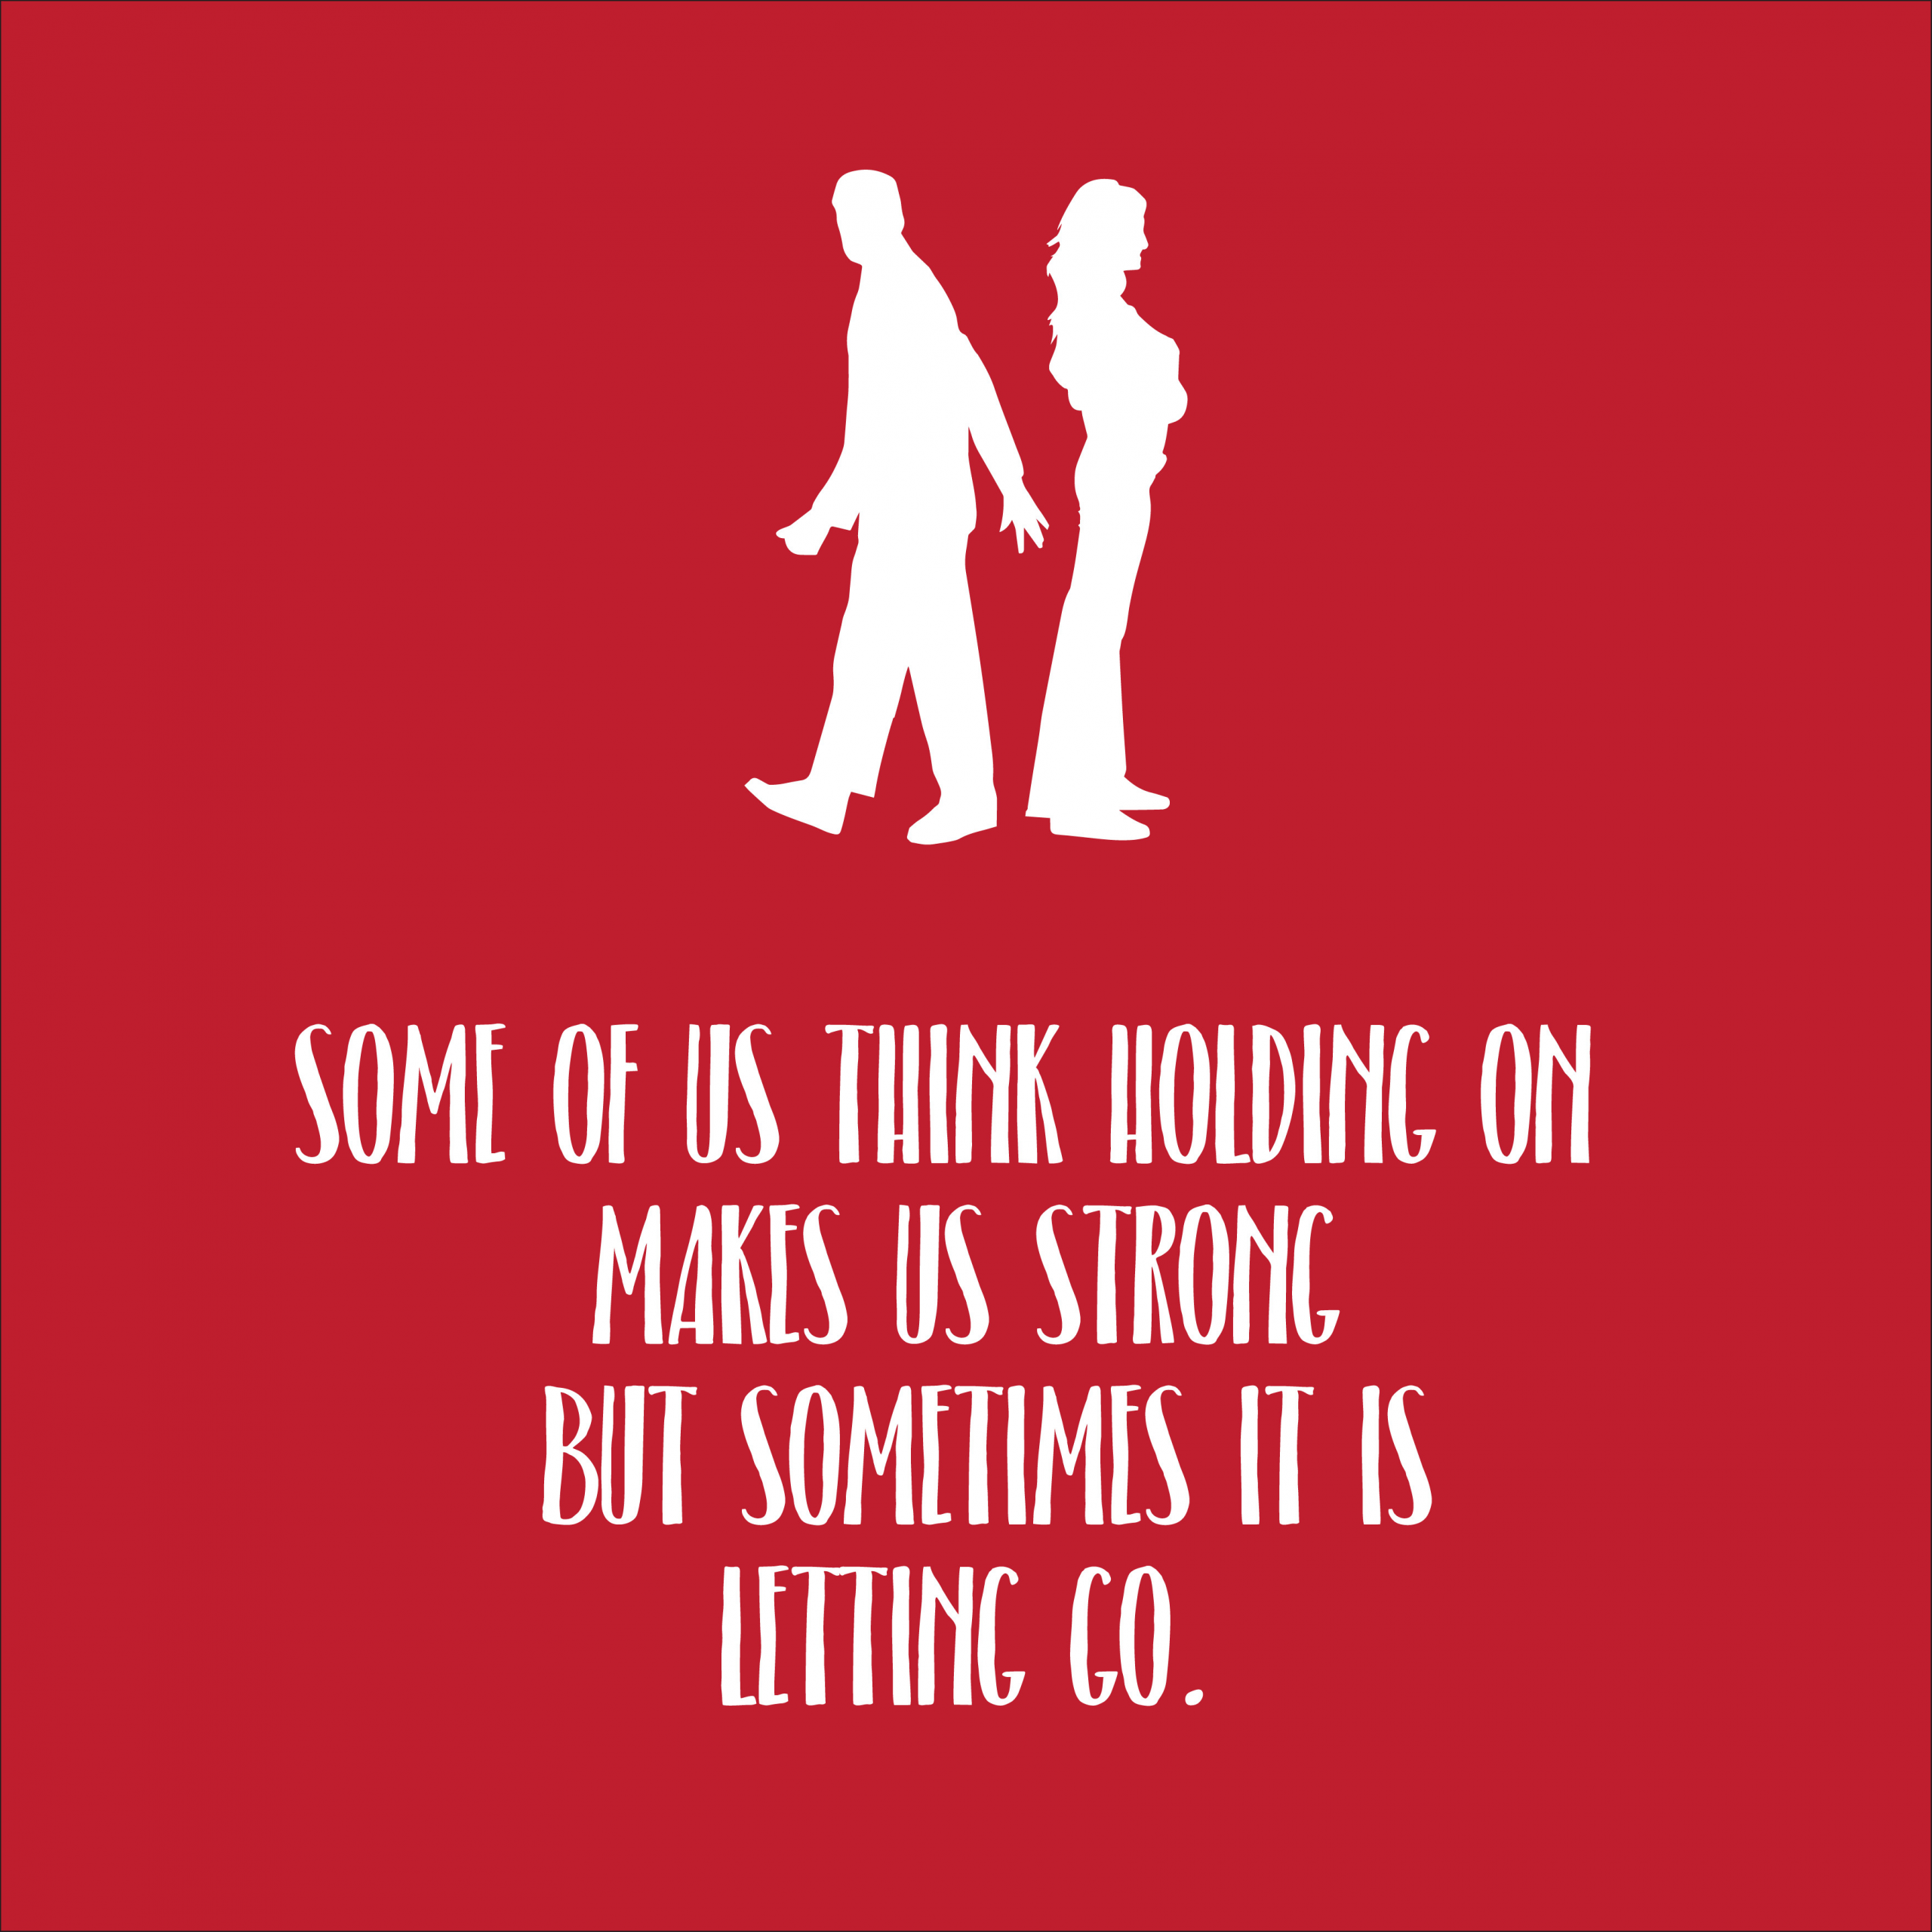 Relationship Quotes With Images
 End of Relationship Quotes lovequotesmessages